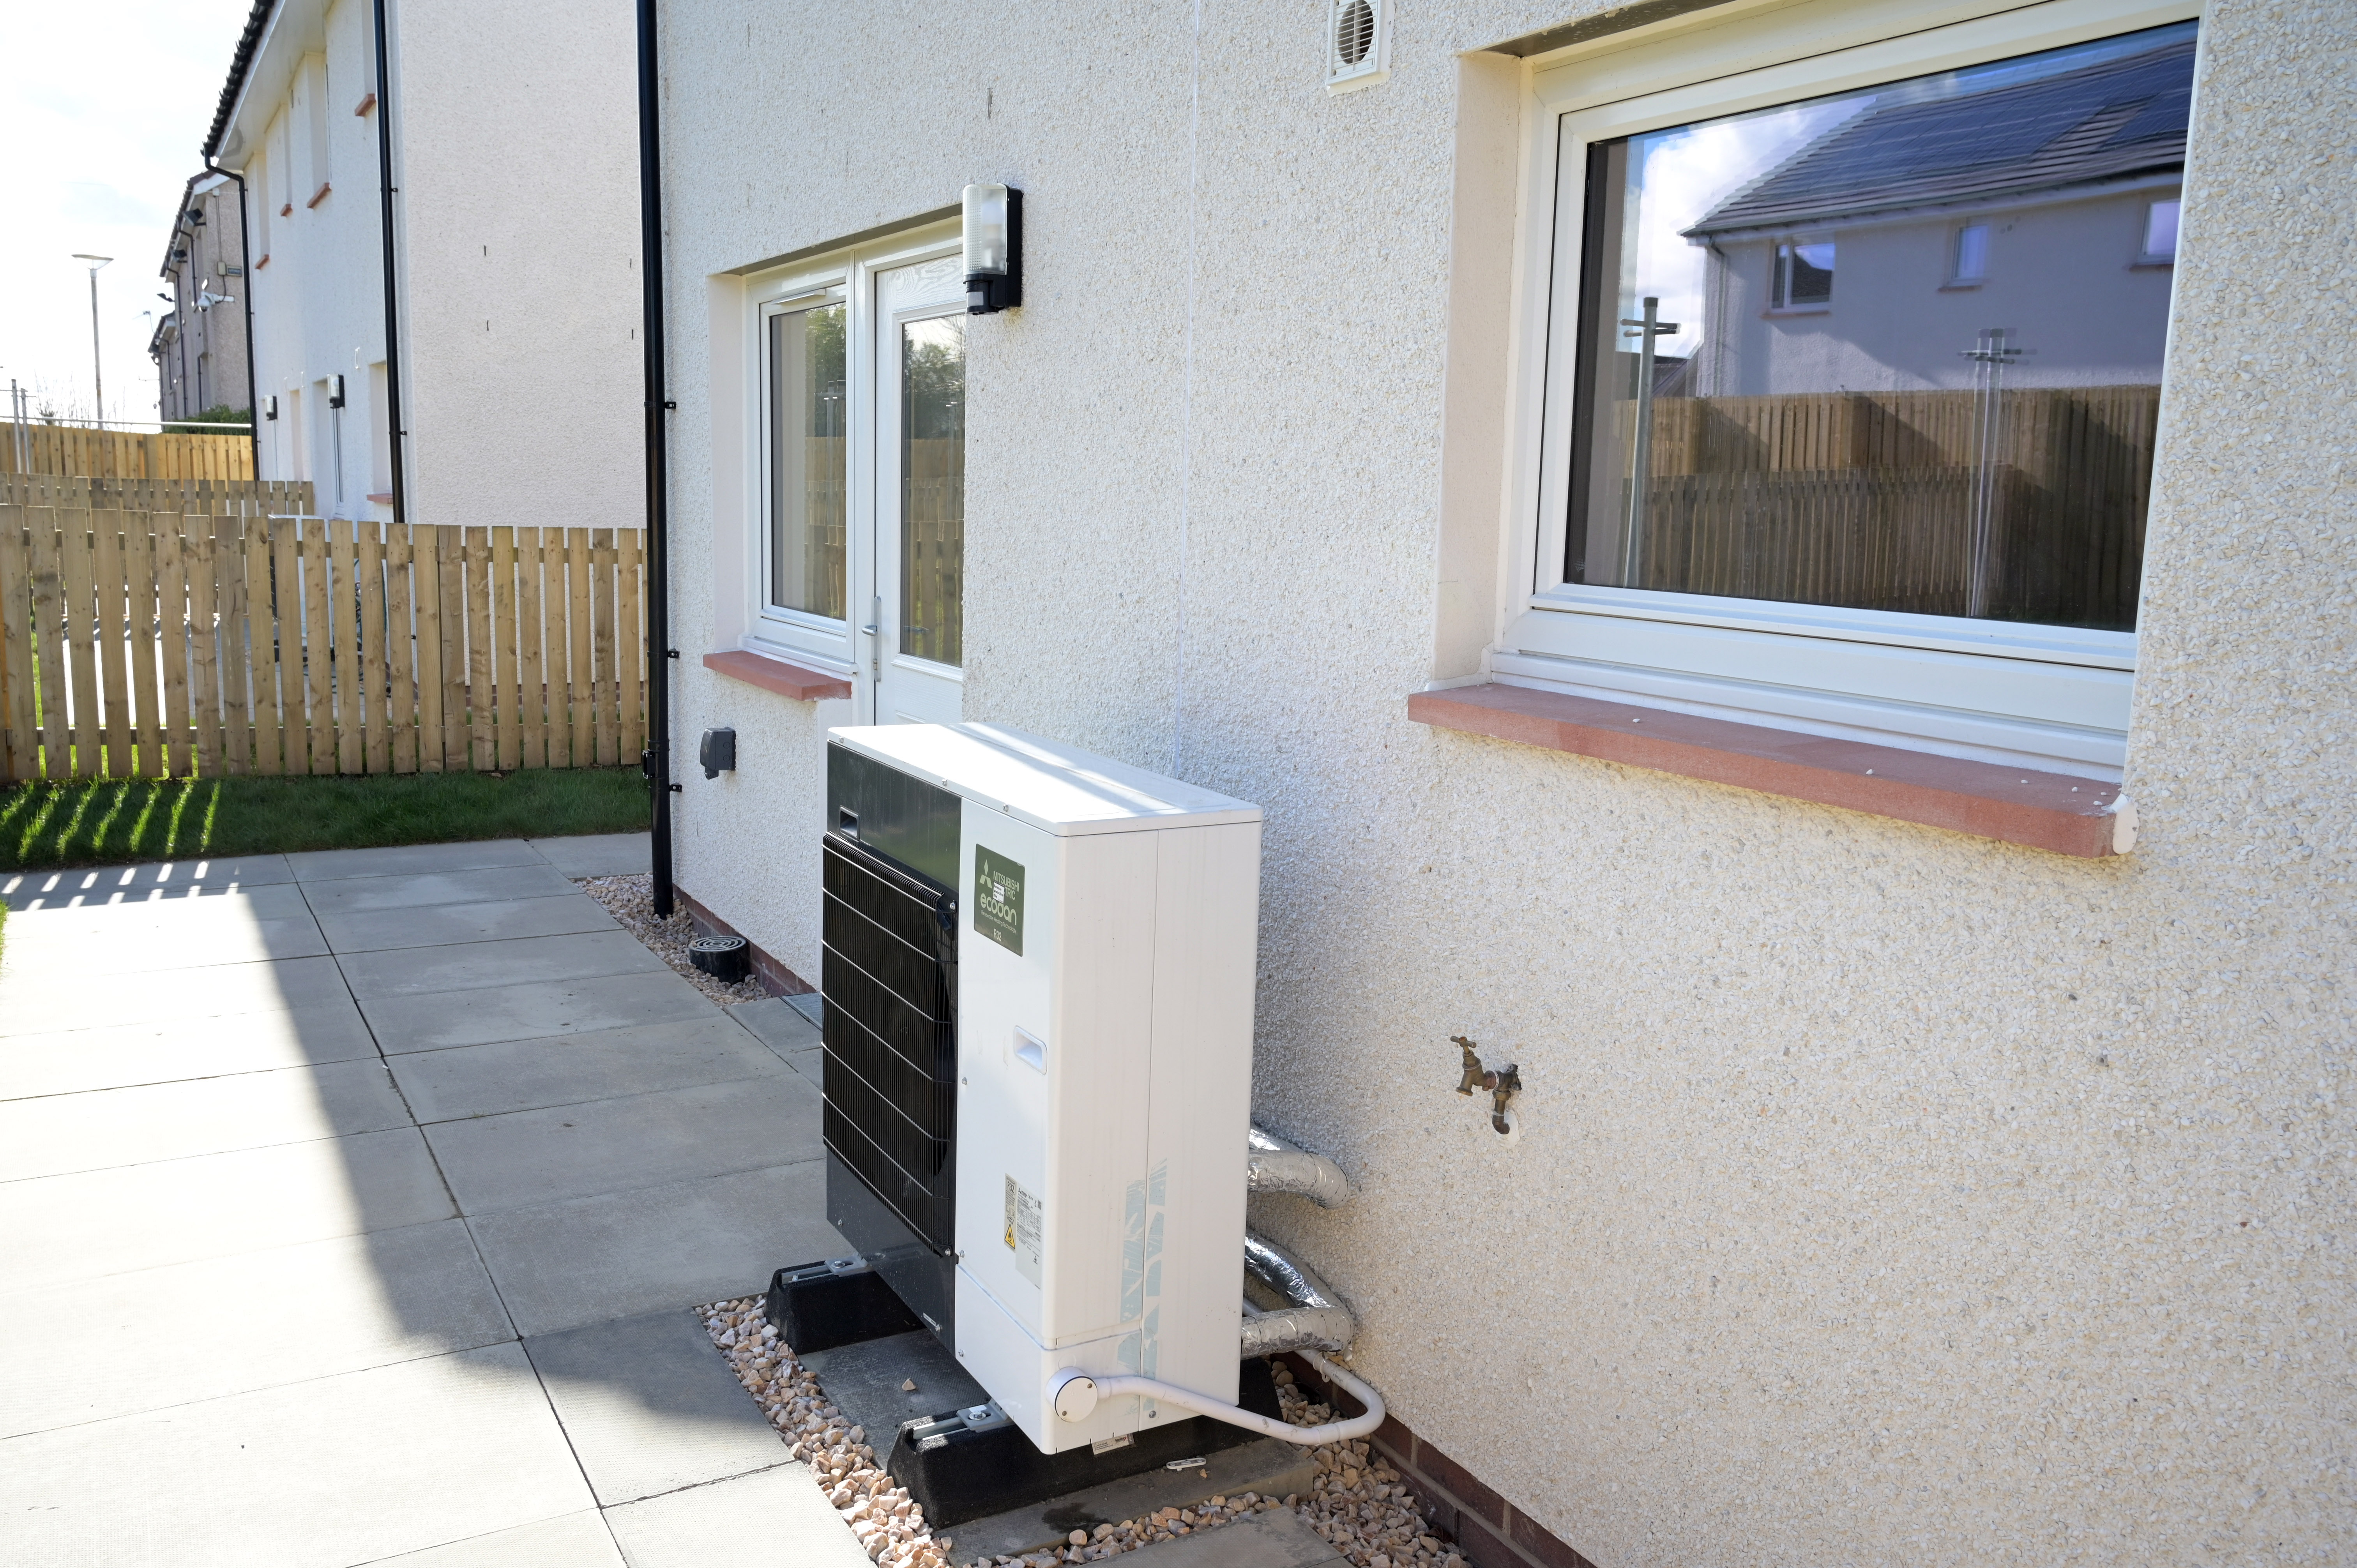 Record year for heat pumps and solar panels in Scottish homes and businesses